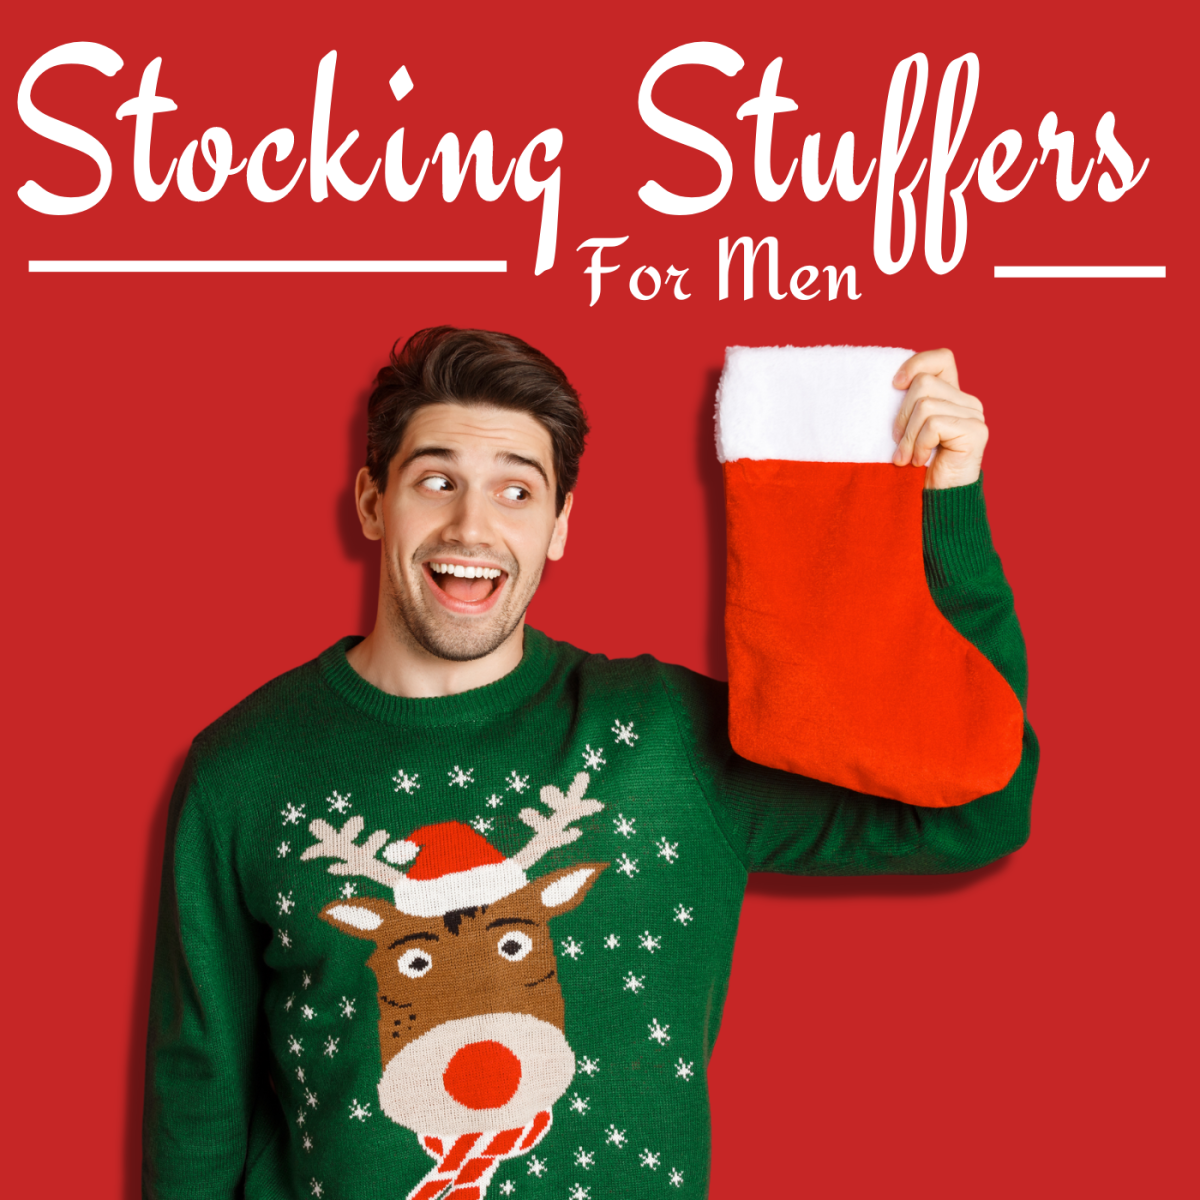 Over 30 awesome ideas for stocking stuffers